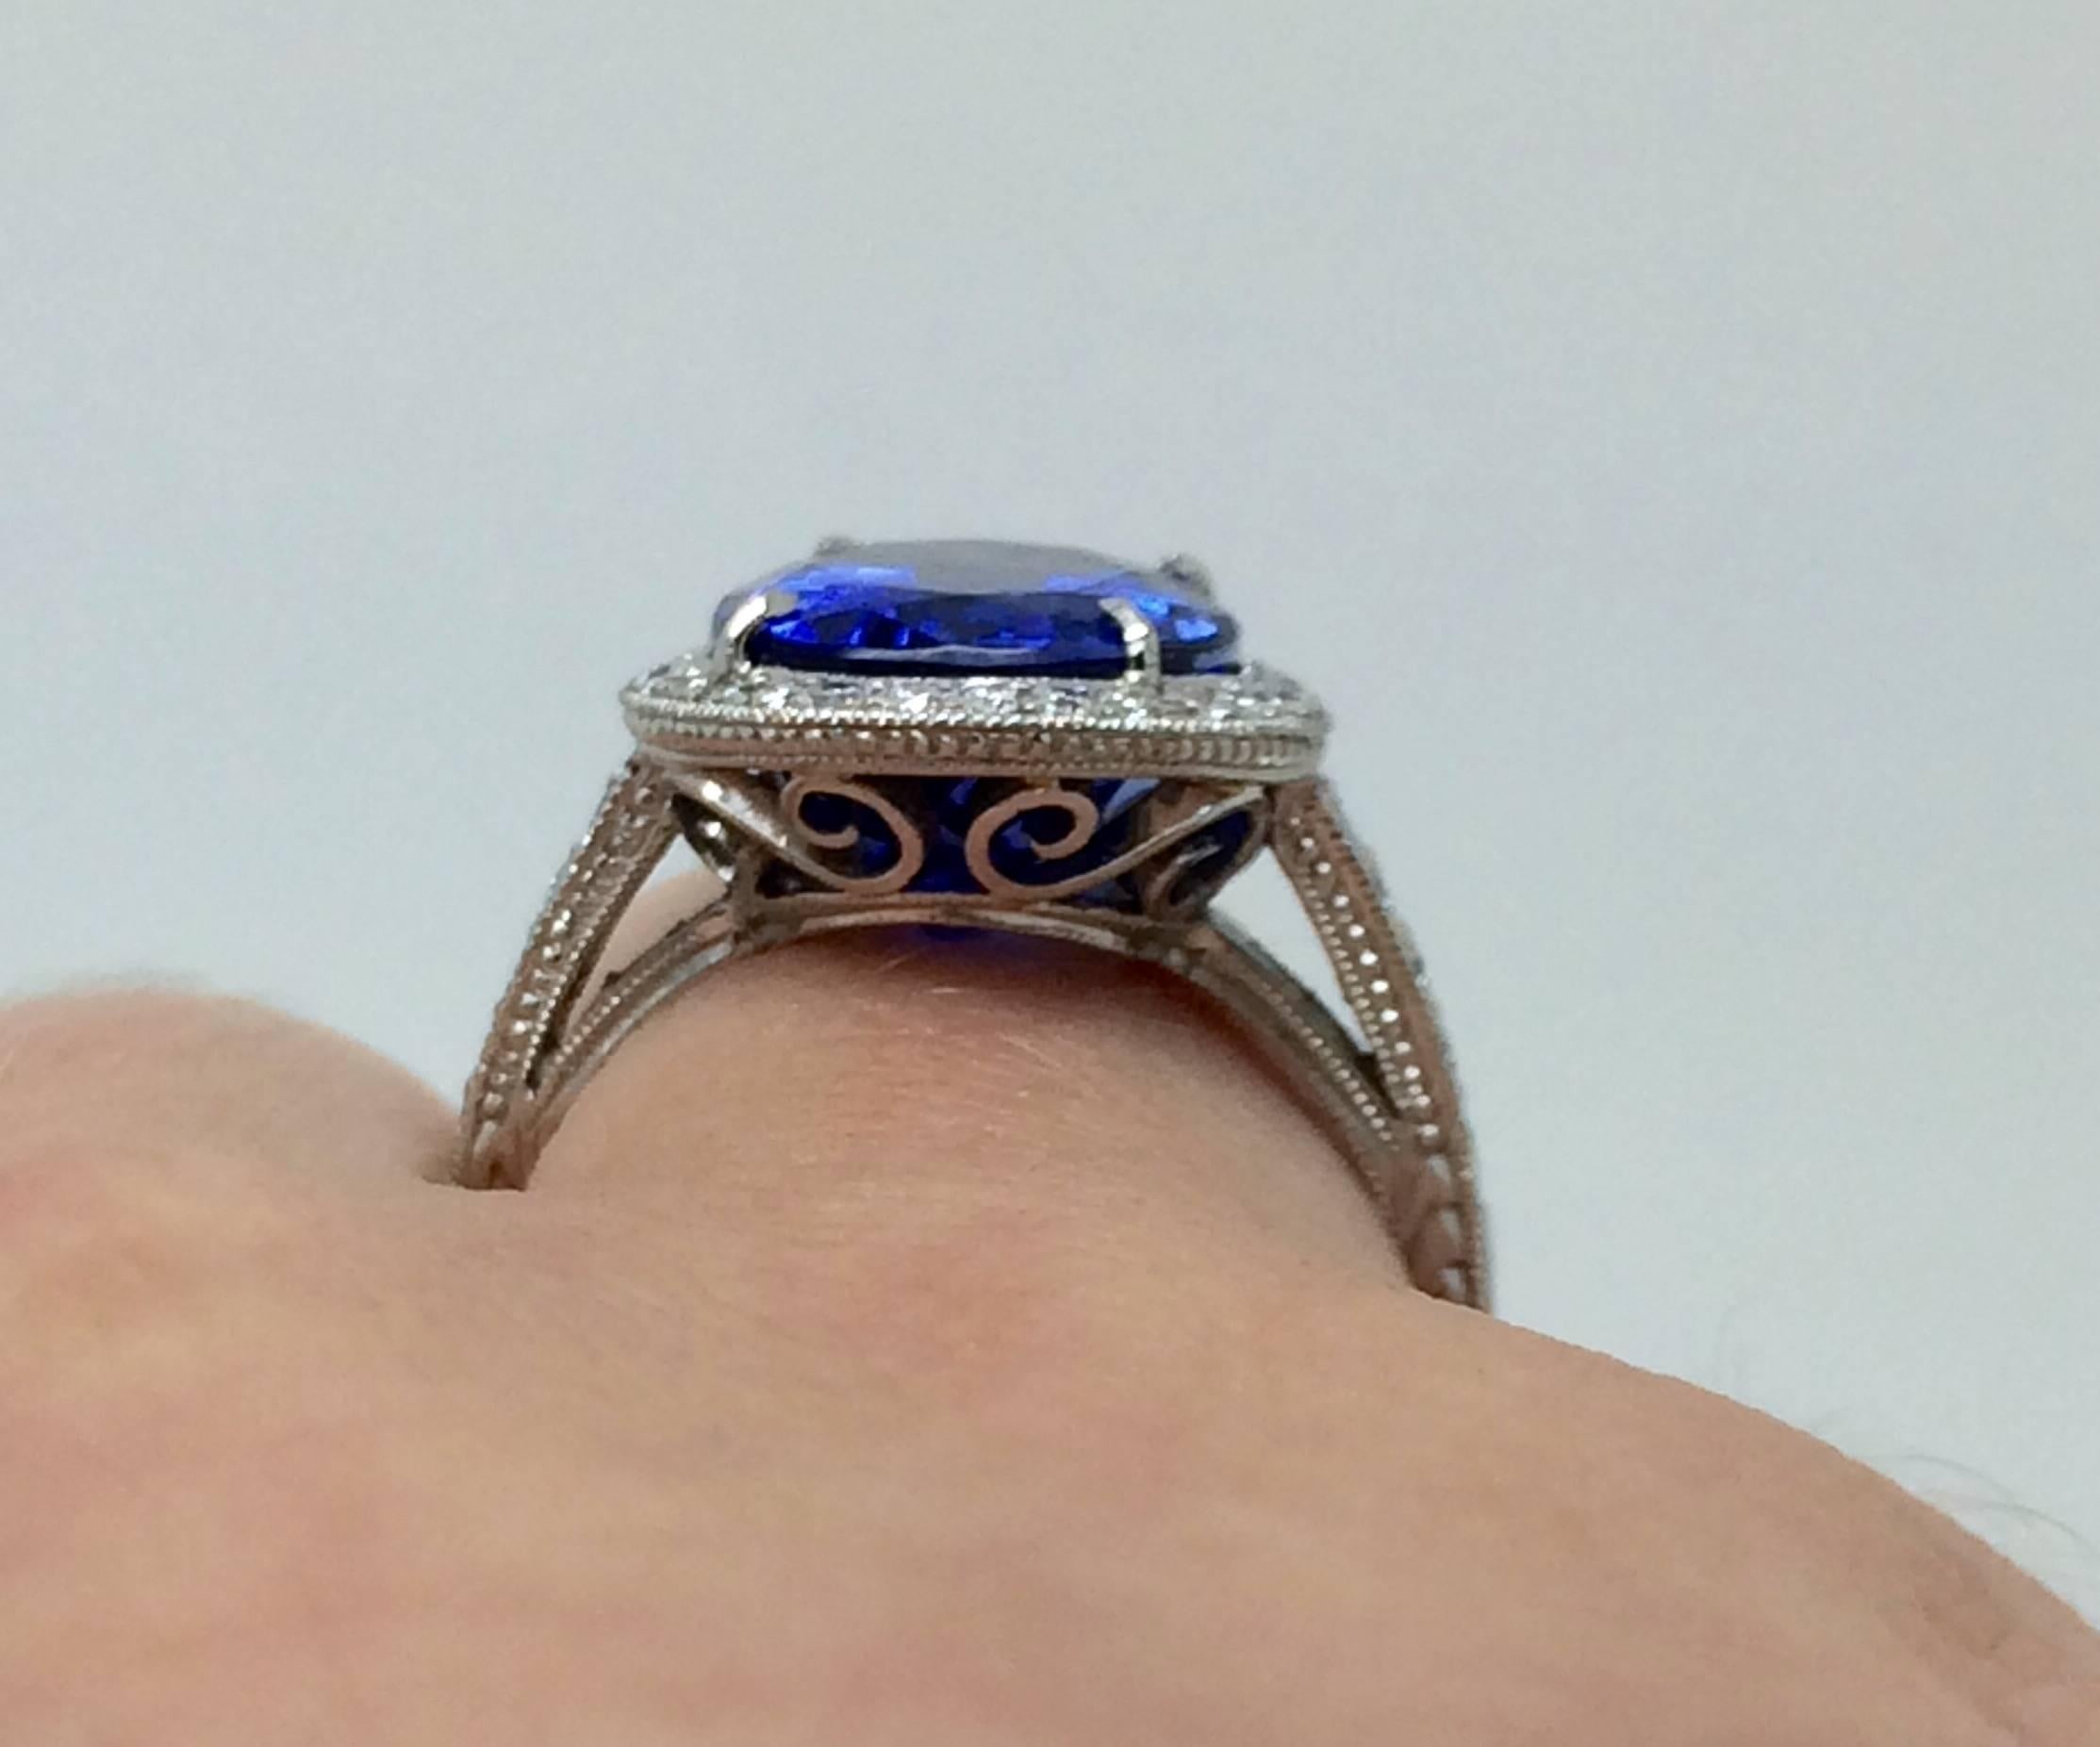 This ring is fit for royalty!  Set in platinum and holding a fancy oval tanzanite weighing 7.28CT.  With a medium dark tone, moderately strong intensity, violetish blue colour, medium make it is a striking combination. Round brilliant cut diamonds